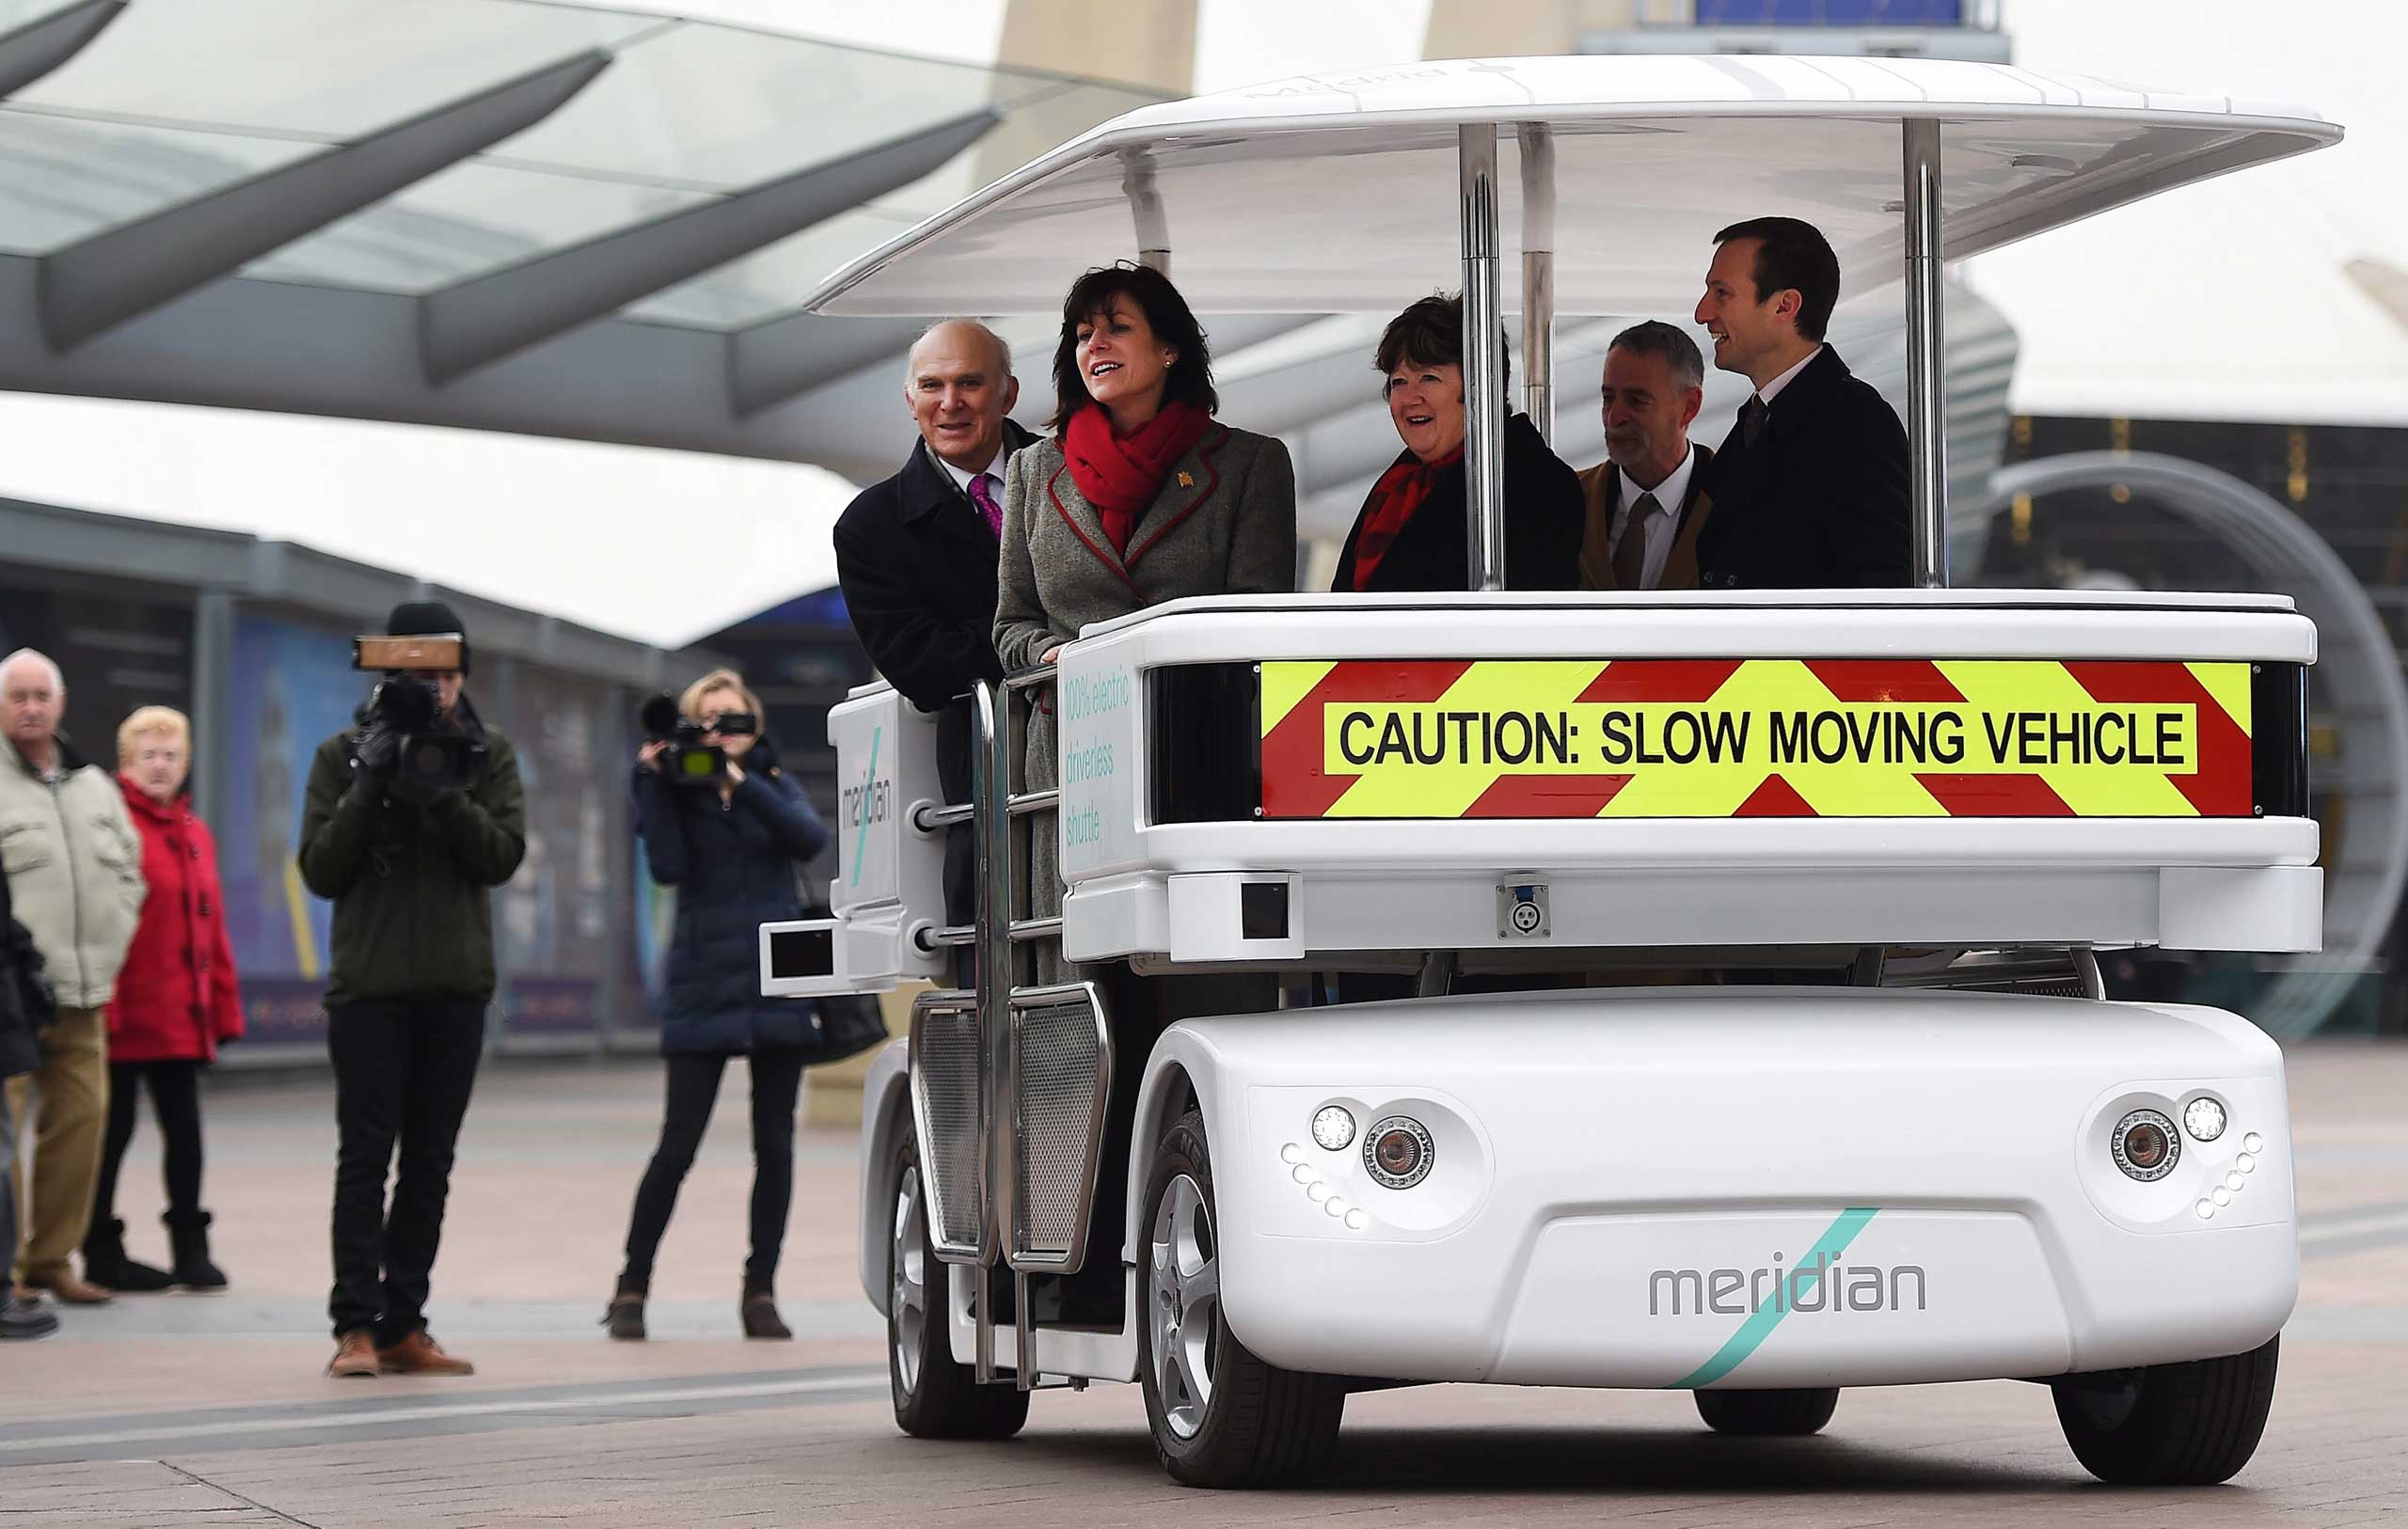 British Transport Minister Claire Perry and British Secretary of State for Business Innovation and Skills Vince Cable ride a driverless 'Meridian' vehicle in London, Feb. 11,2015. (Andy Rain—EPA)